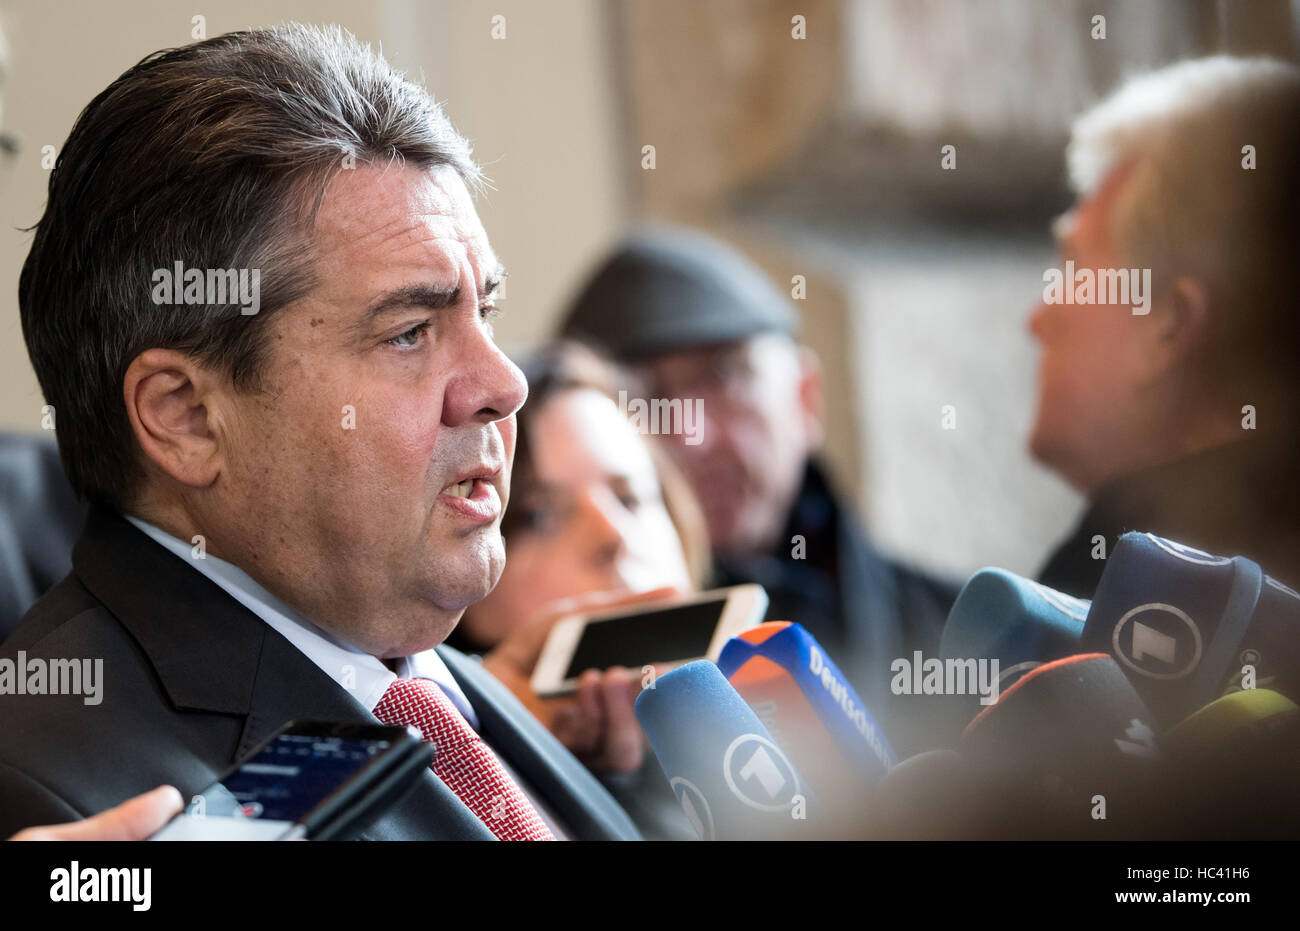 Berlin, Germany. 7th Dec, 2016. SPD leader and German Economy Minister Sigmar Gabriel (SPD) speaking about the decision made on dual citizenship at the CDU party conference in Berlin, Germany, 7 December 2016. Following an intense debate at its party conference, the CDU wants to annul the compromise made with the SPD on the issue of dual citizenship. Photo: Bernd von Jutrczenka/dpa/Alamy Live News Stock Photo